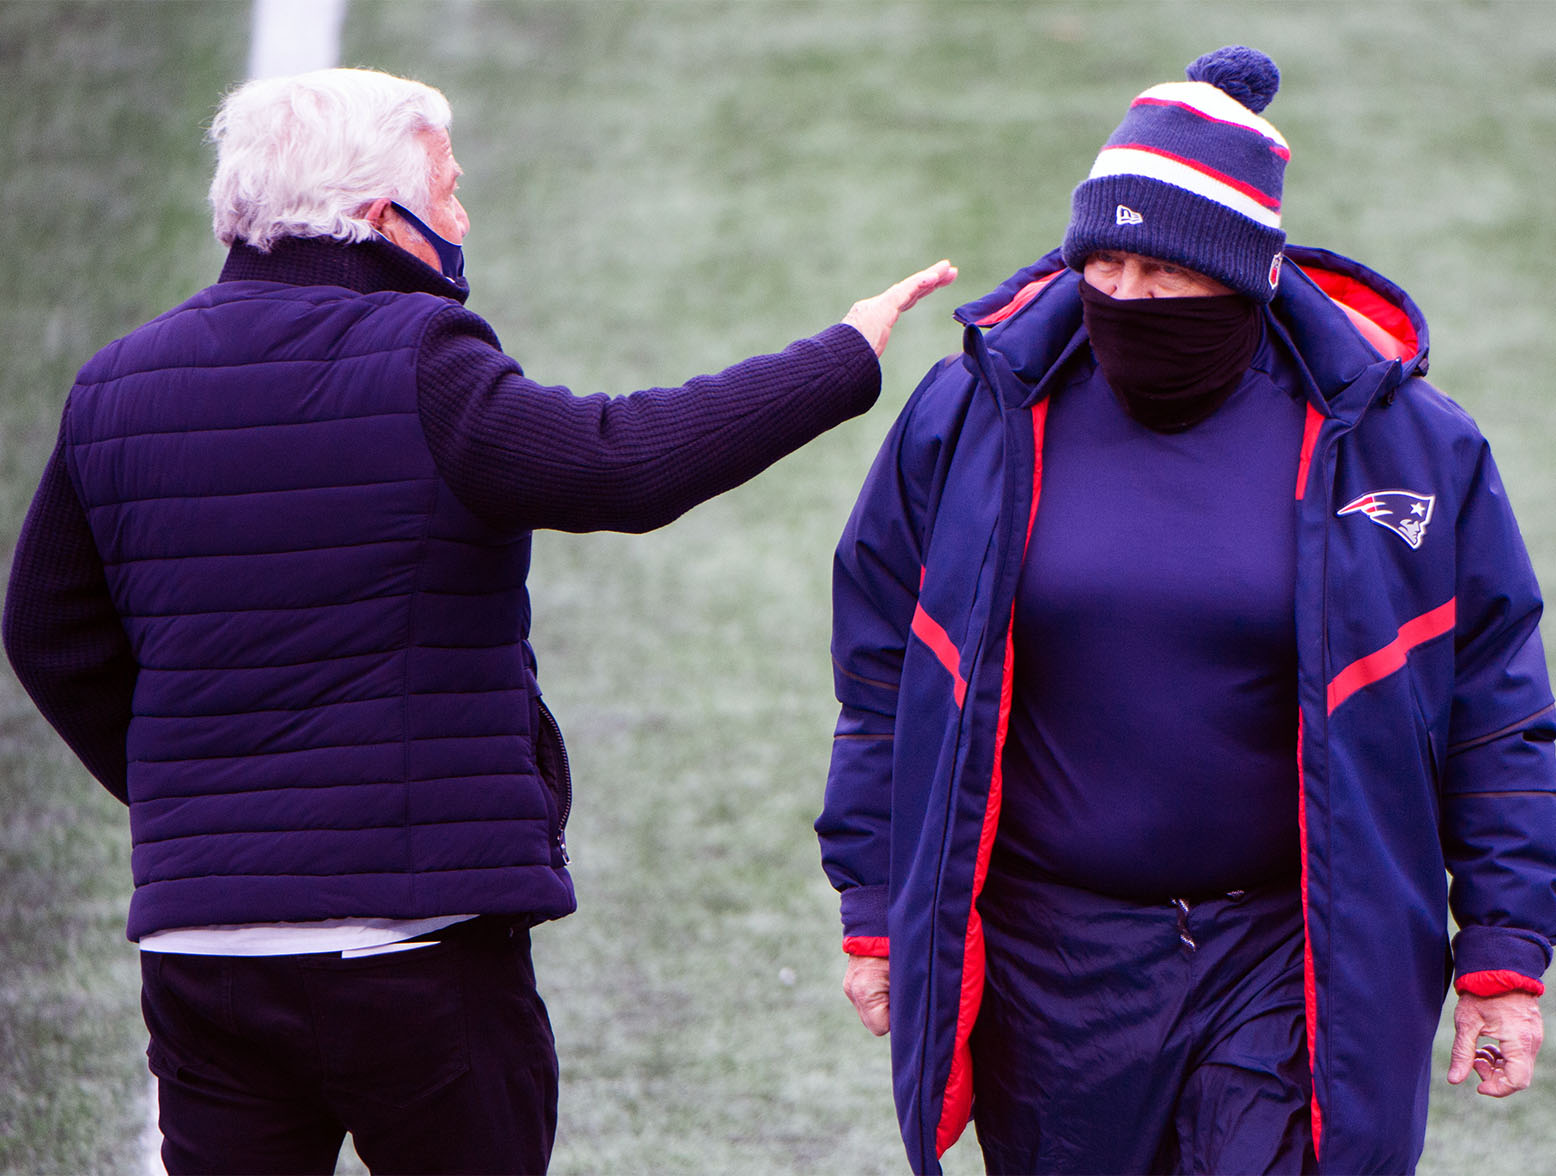 FOXBOROUGH, MA - JANUARY 3, 2021: New England Patriots owner Robert Kraft (L) pats head coach Bill Belichick on the shoulder during warmups prior to the start of the game against the New York Jets at Gillette Stadium on January 3, 2021 in Foxborough, Massachusetts. (Photo by Kathryn Riley/Getty Images)